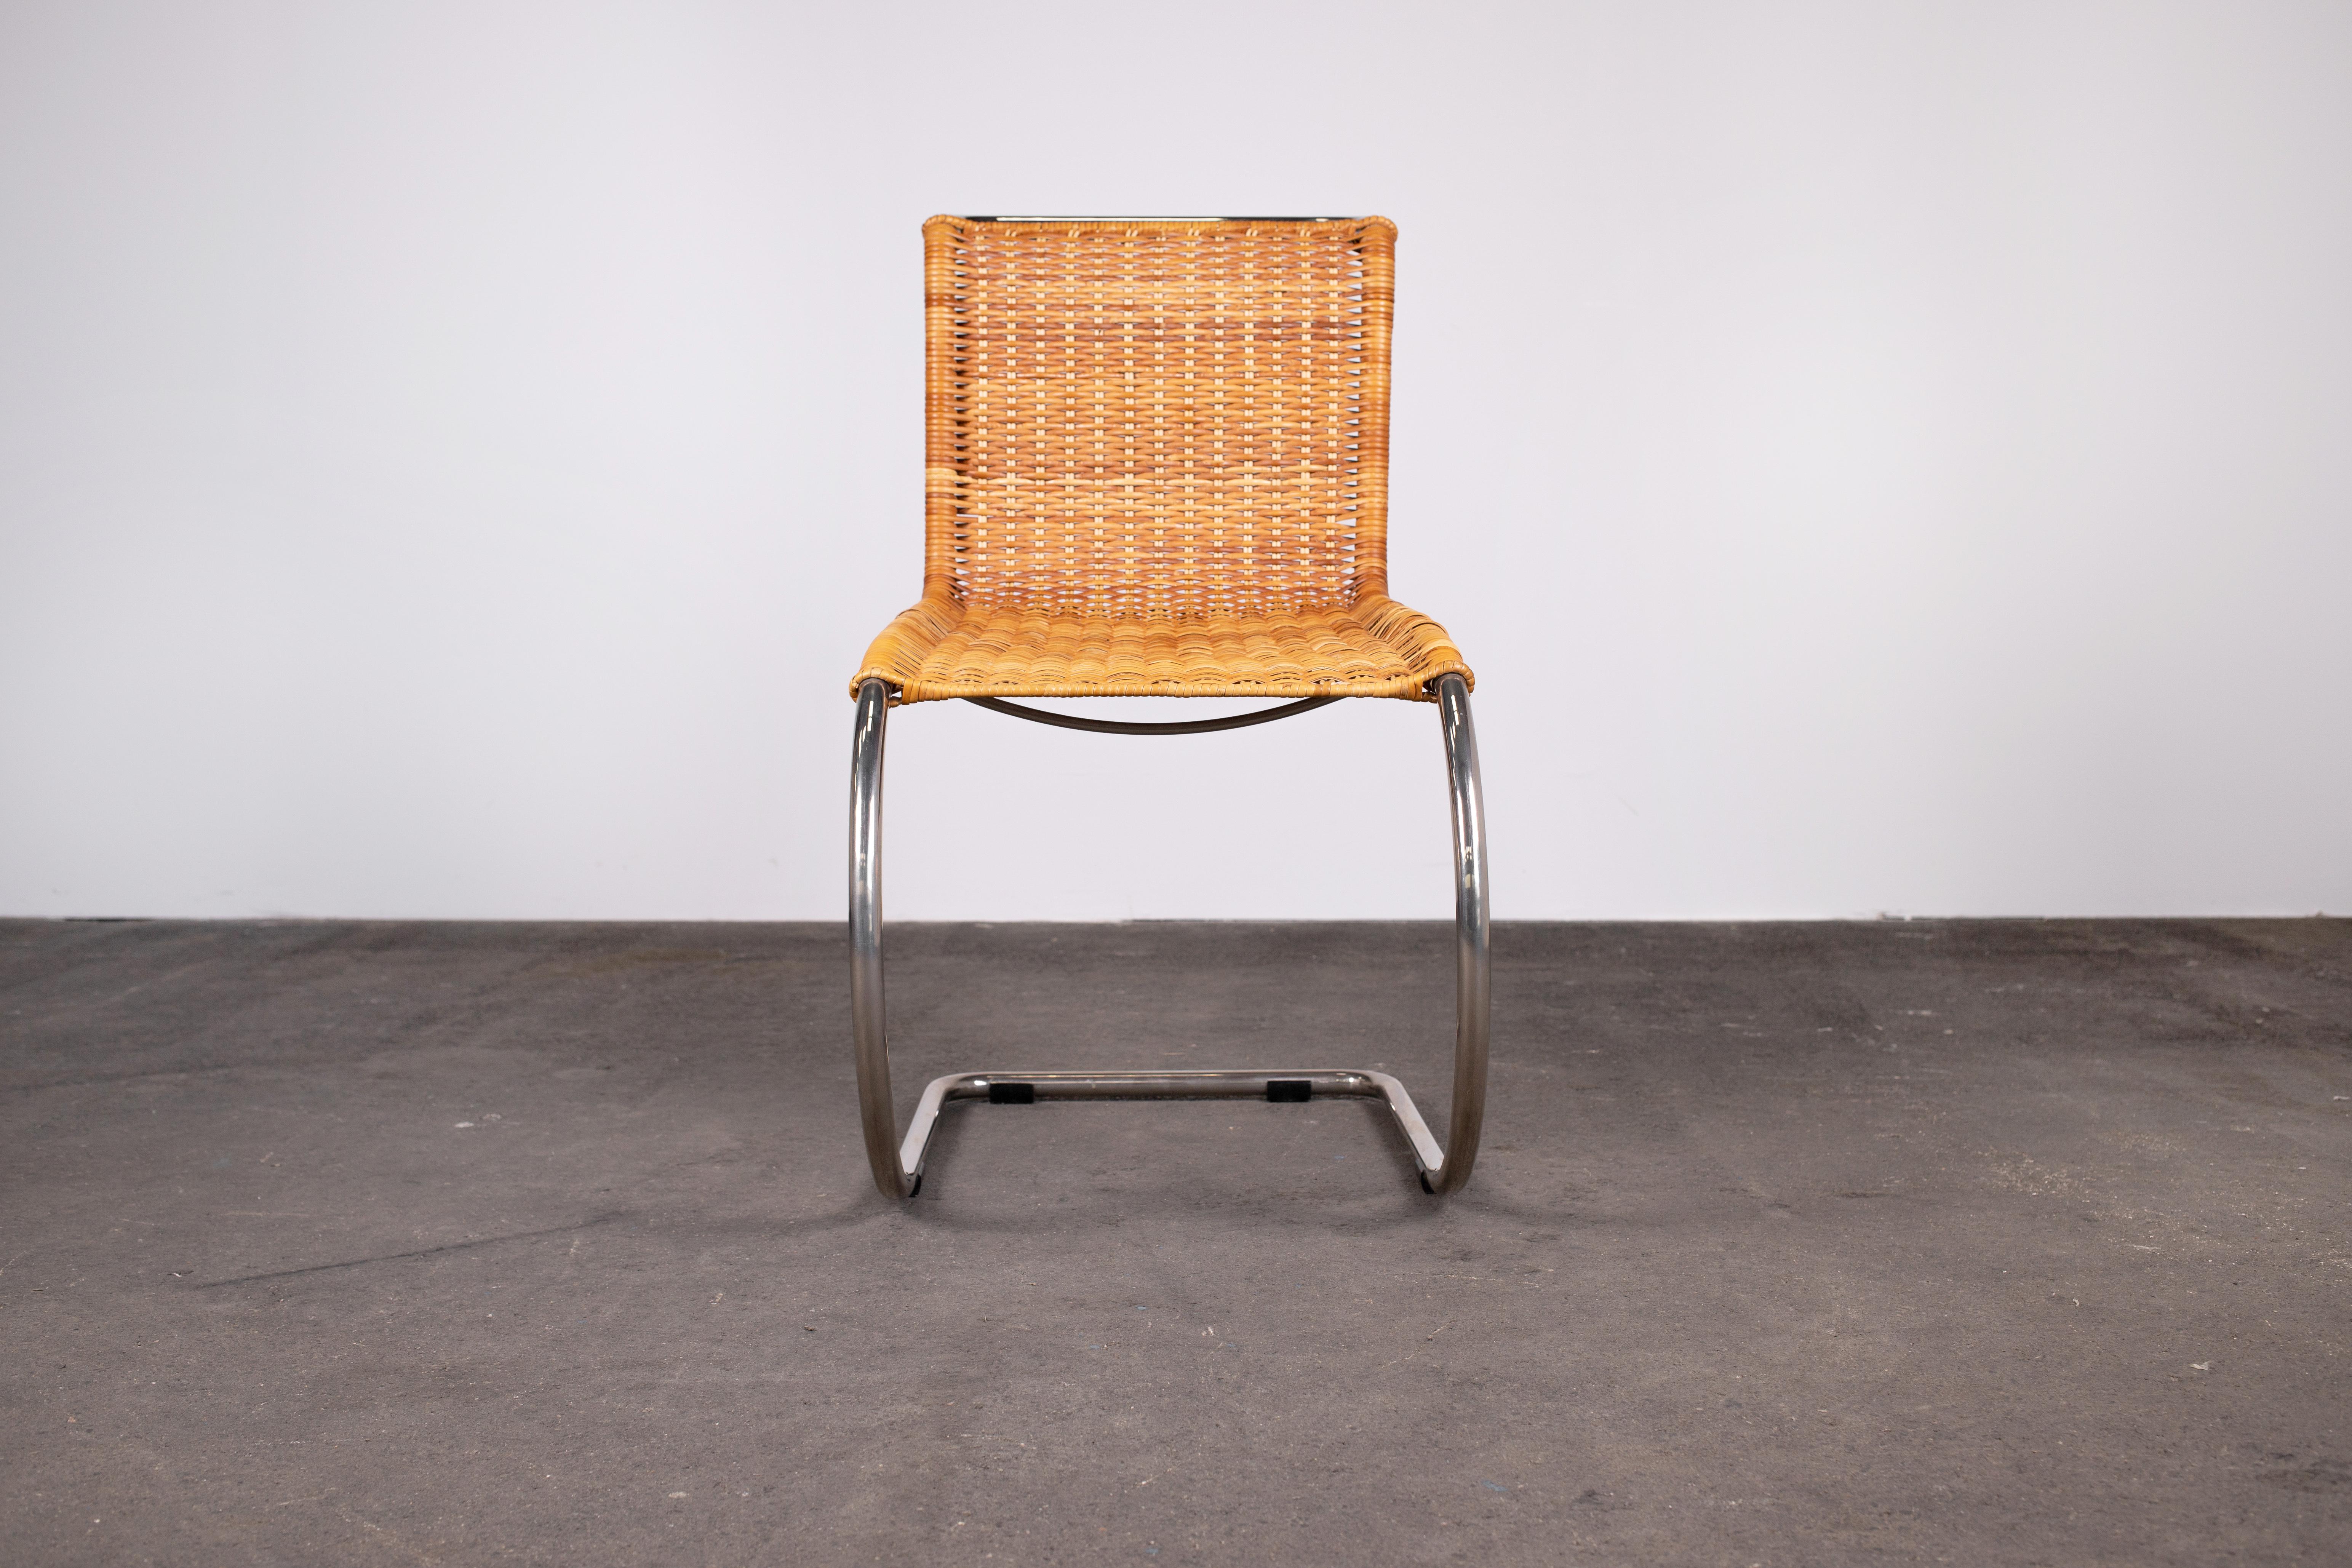 Iconic Mid-Century Modern cantilever MR Chair by Mies Van Der Rohe in chromed bent tube steel and stunning original rattan weave. 

This beautiful example is the rare and desirable Tecta edition. It features a more sophisticated weave that avoids